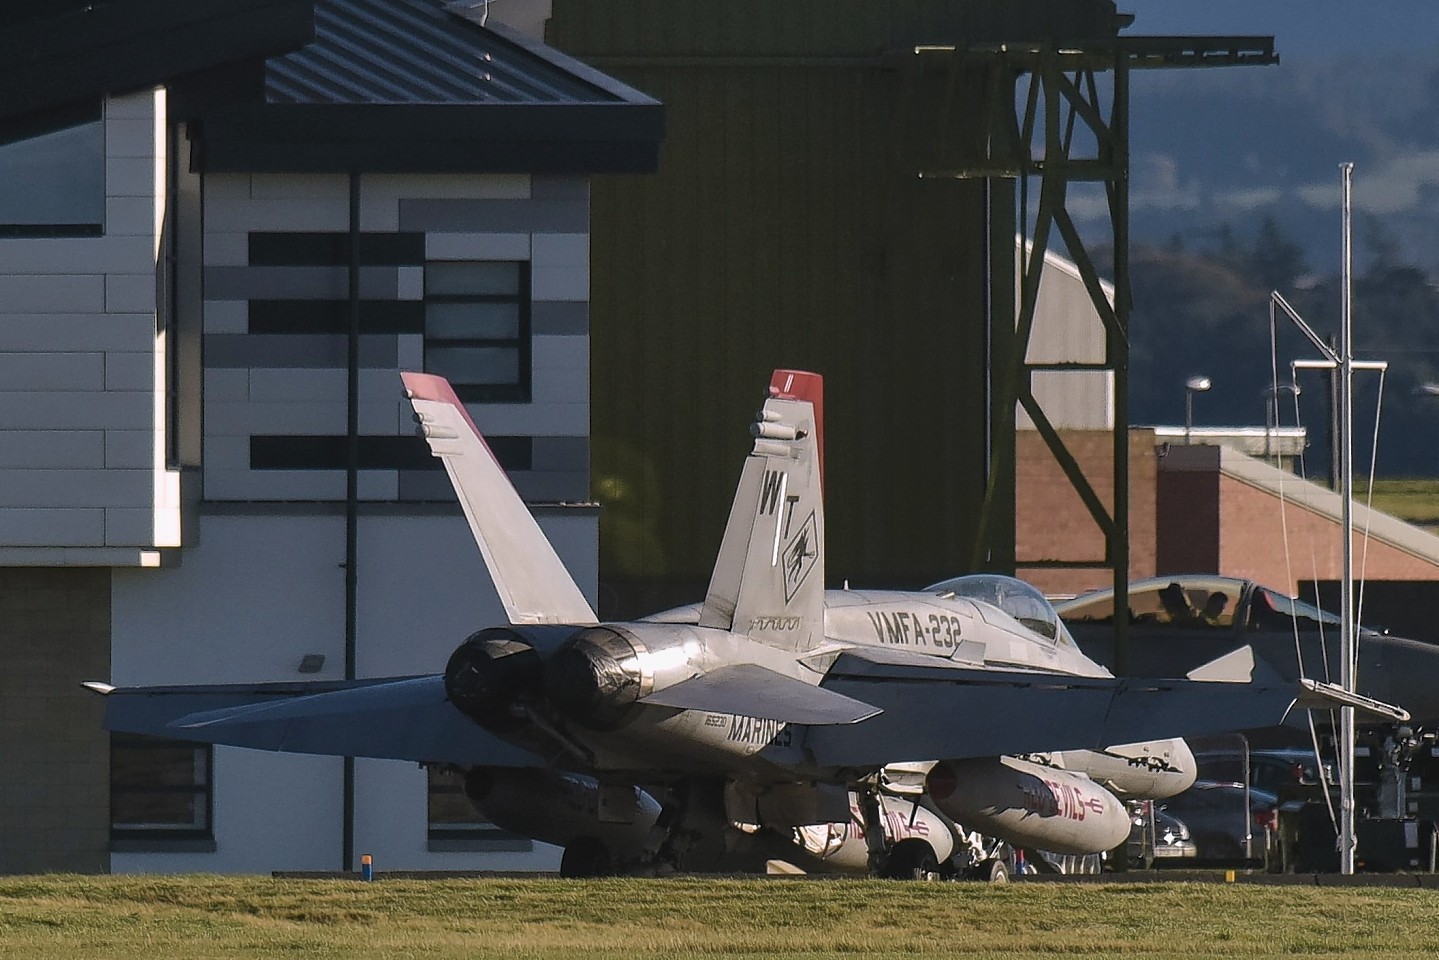 US pilots arrive in Lossiemouth after one of their colleagues died in a crash in England